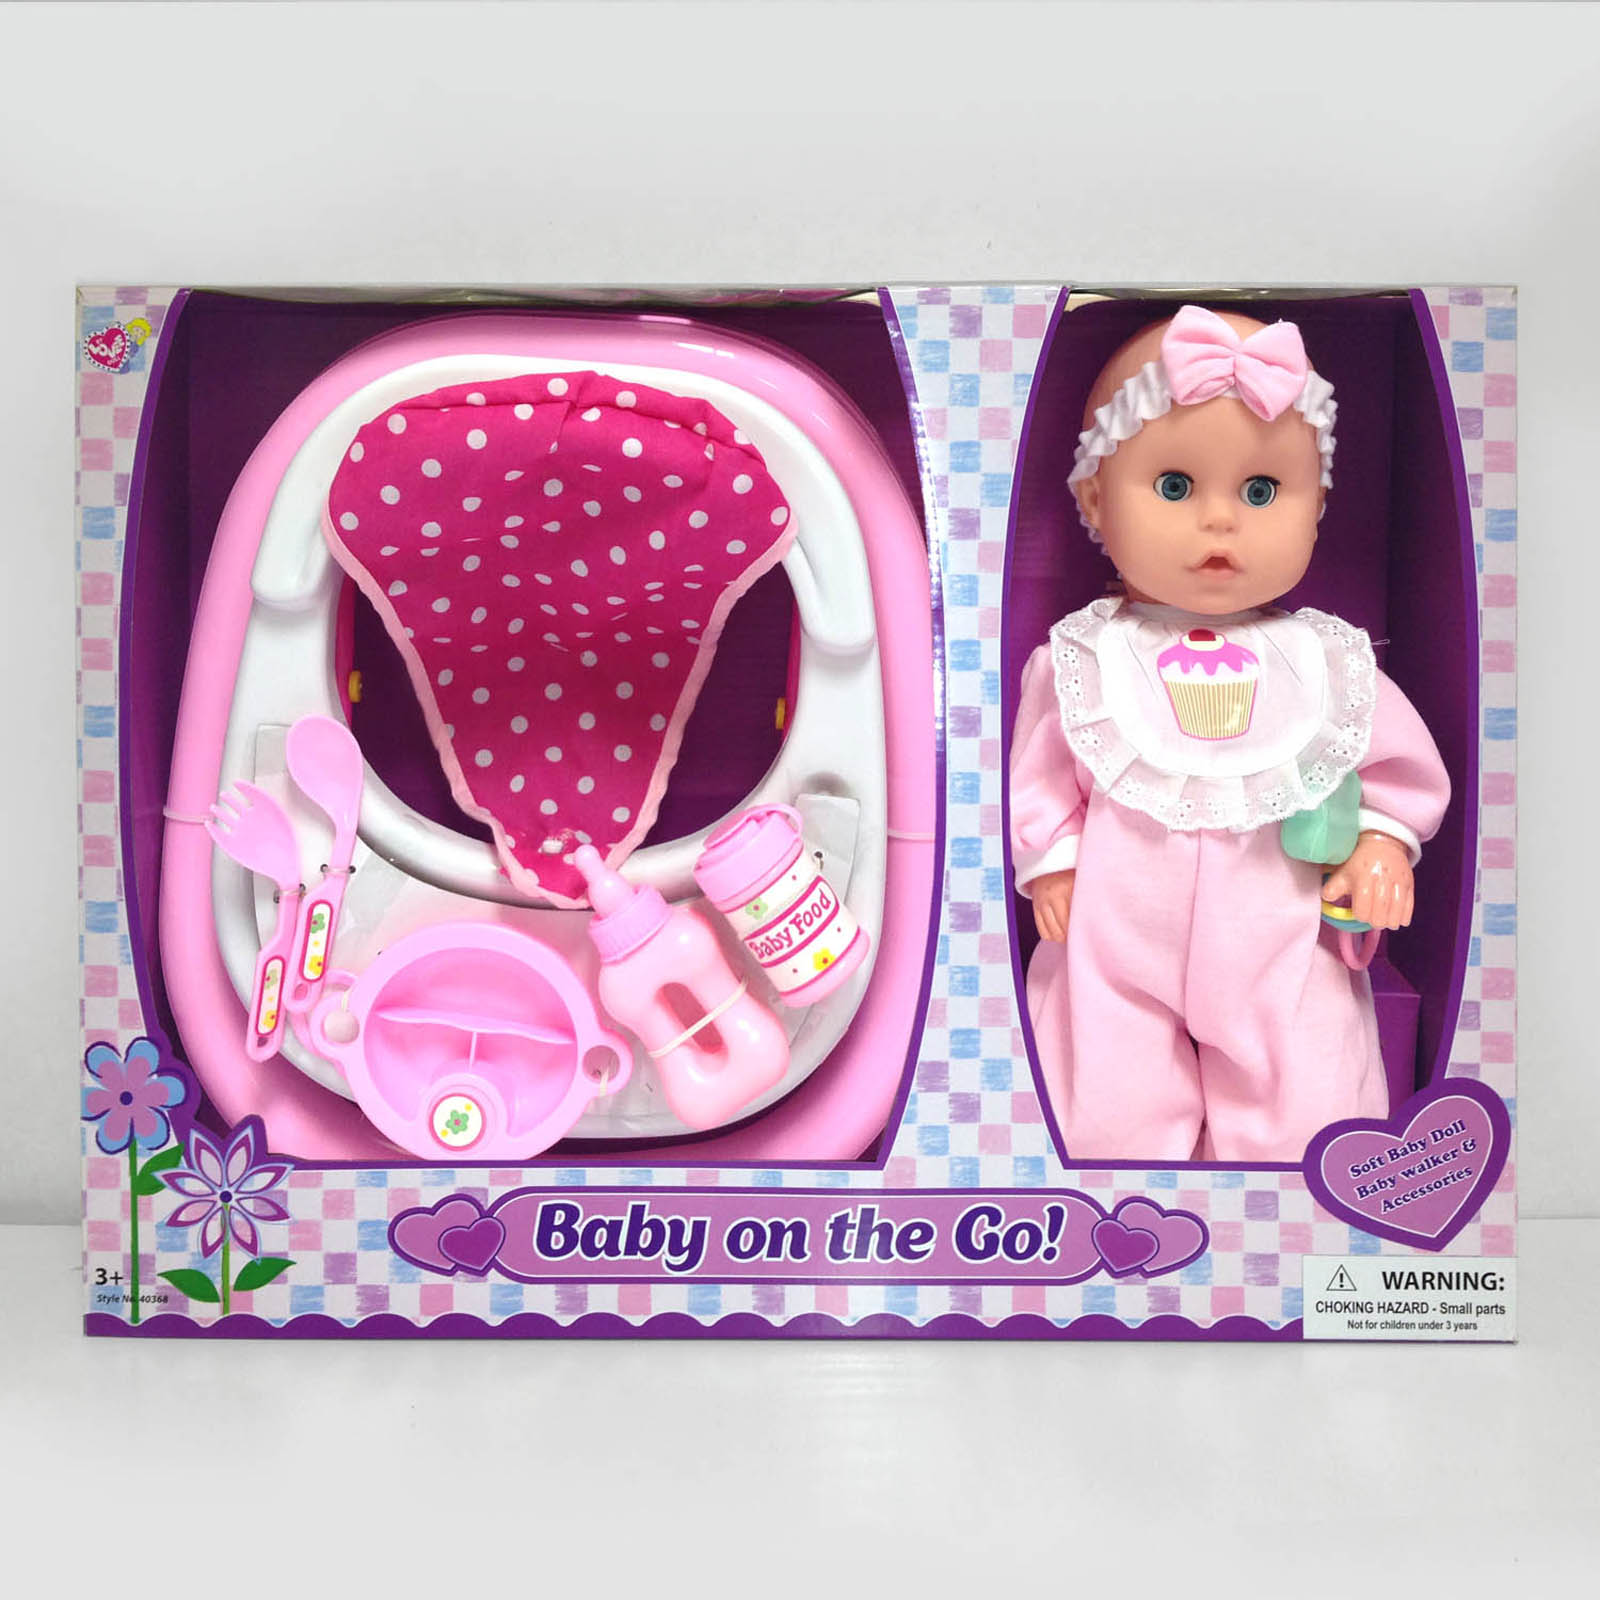 14" Baby Doll with Walker and accessories